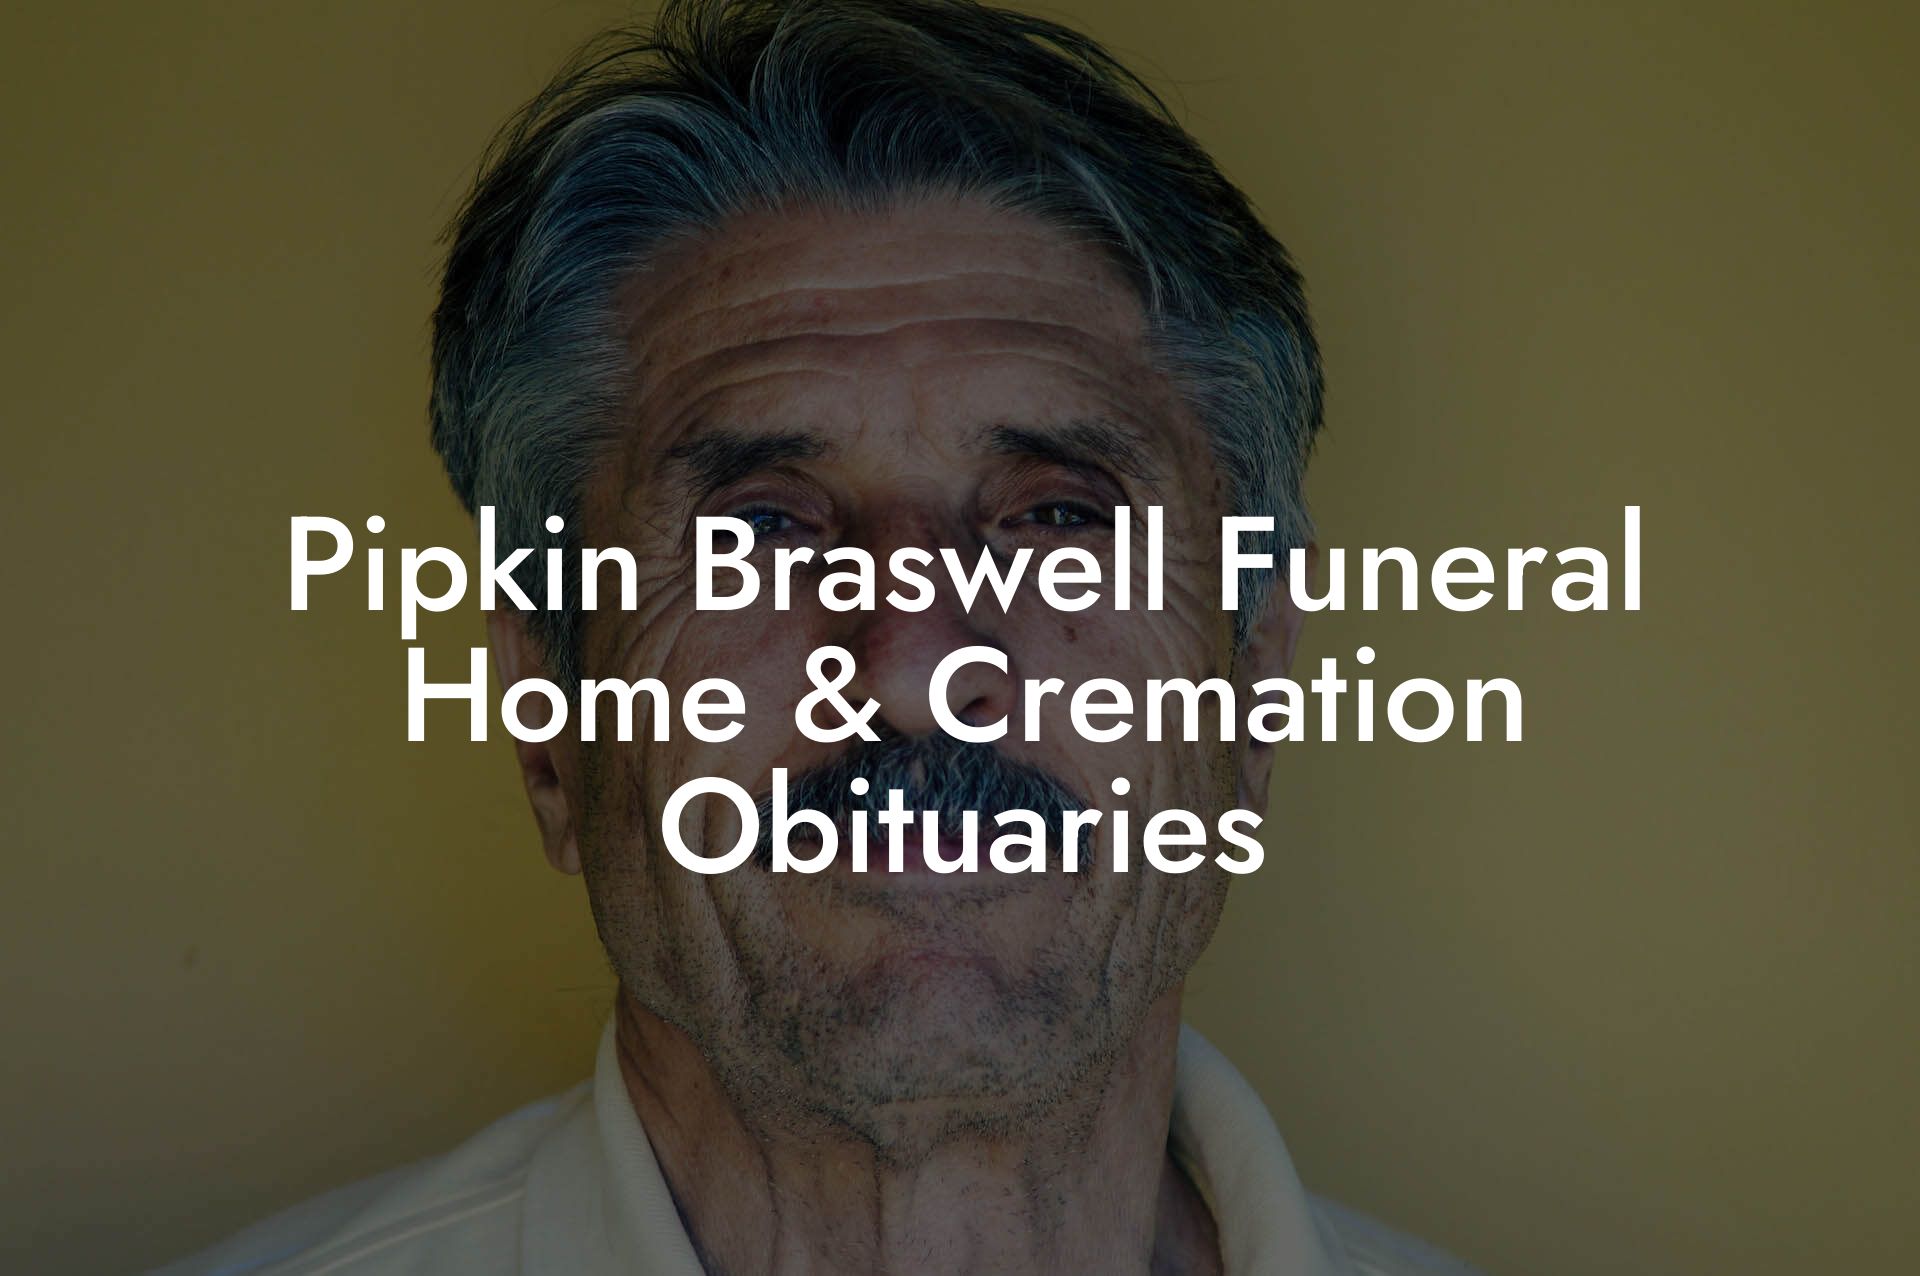 Pipkin Braswell Funeral Home & Cremation Obituaries